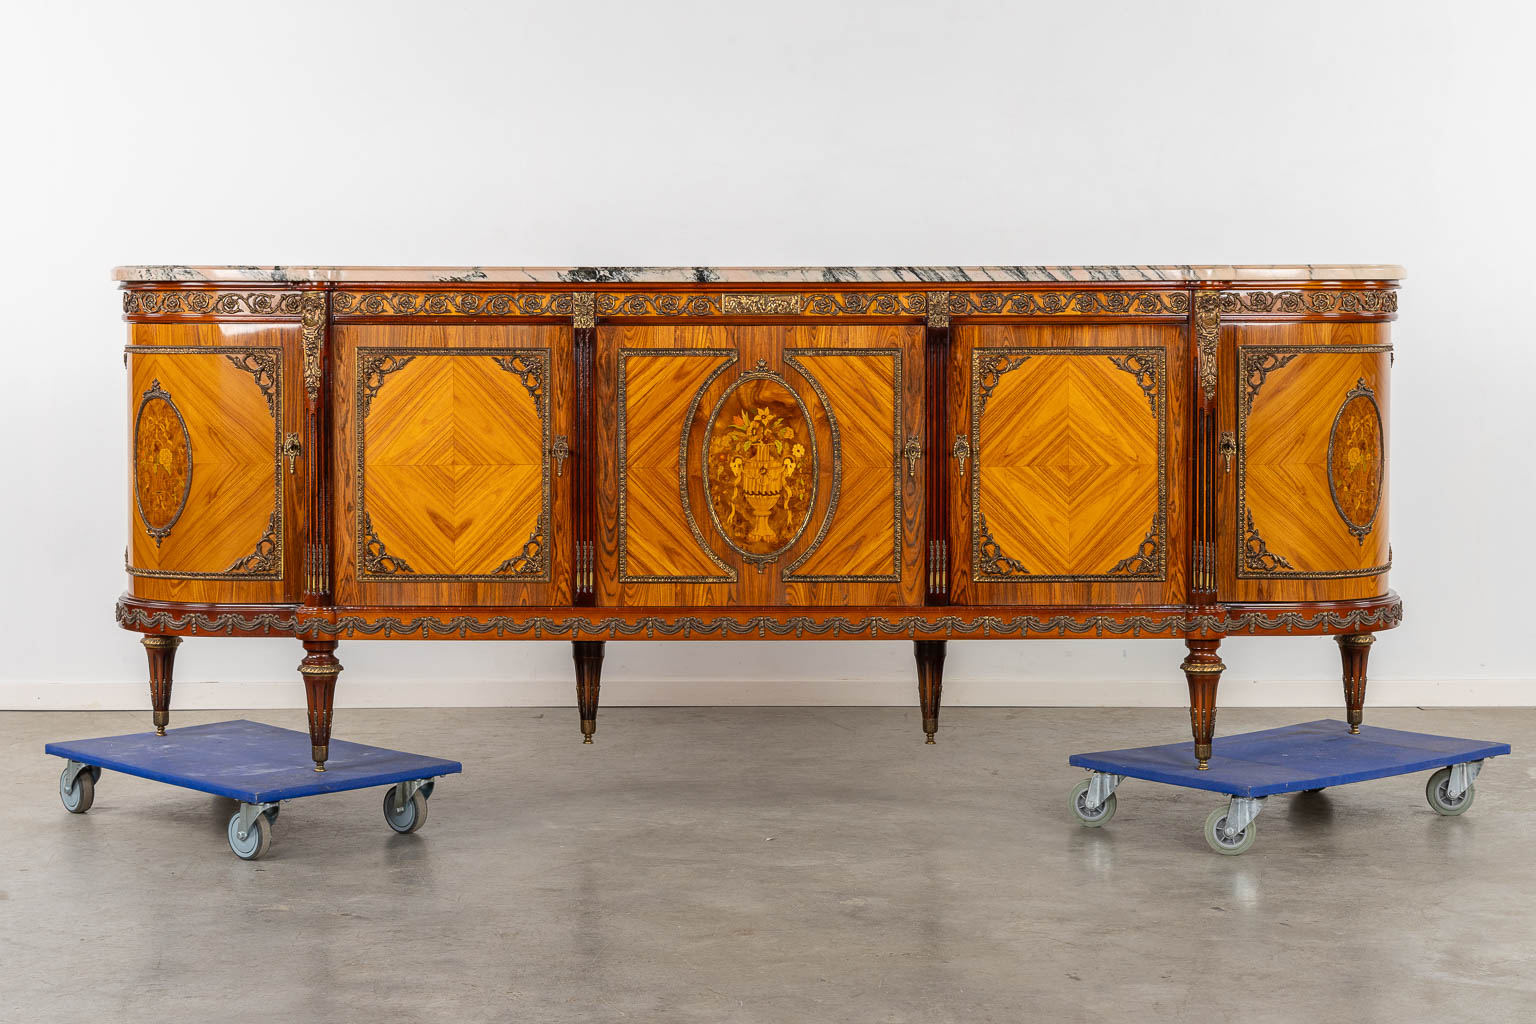 Ehalt, a 9-piece dining room set, 20th C. (L:58 x W:265 x H:100 cm) - Image 6 of 13